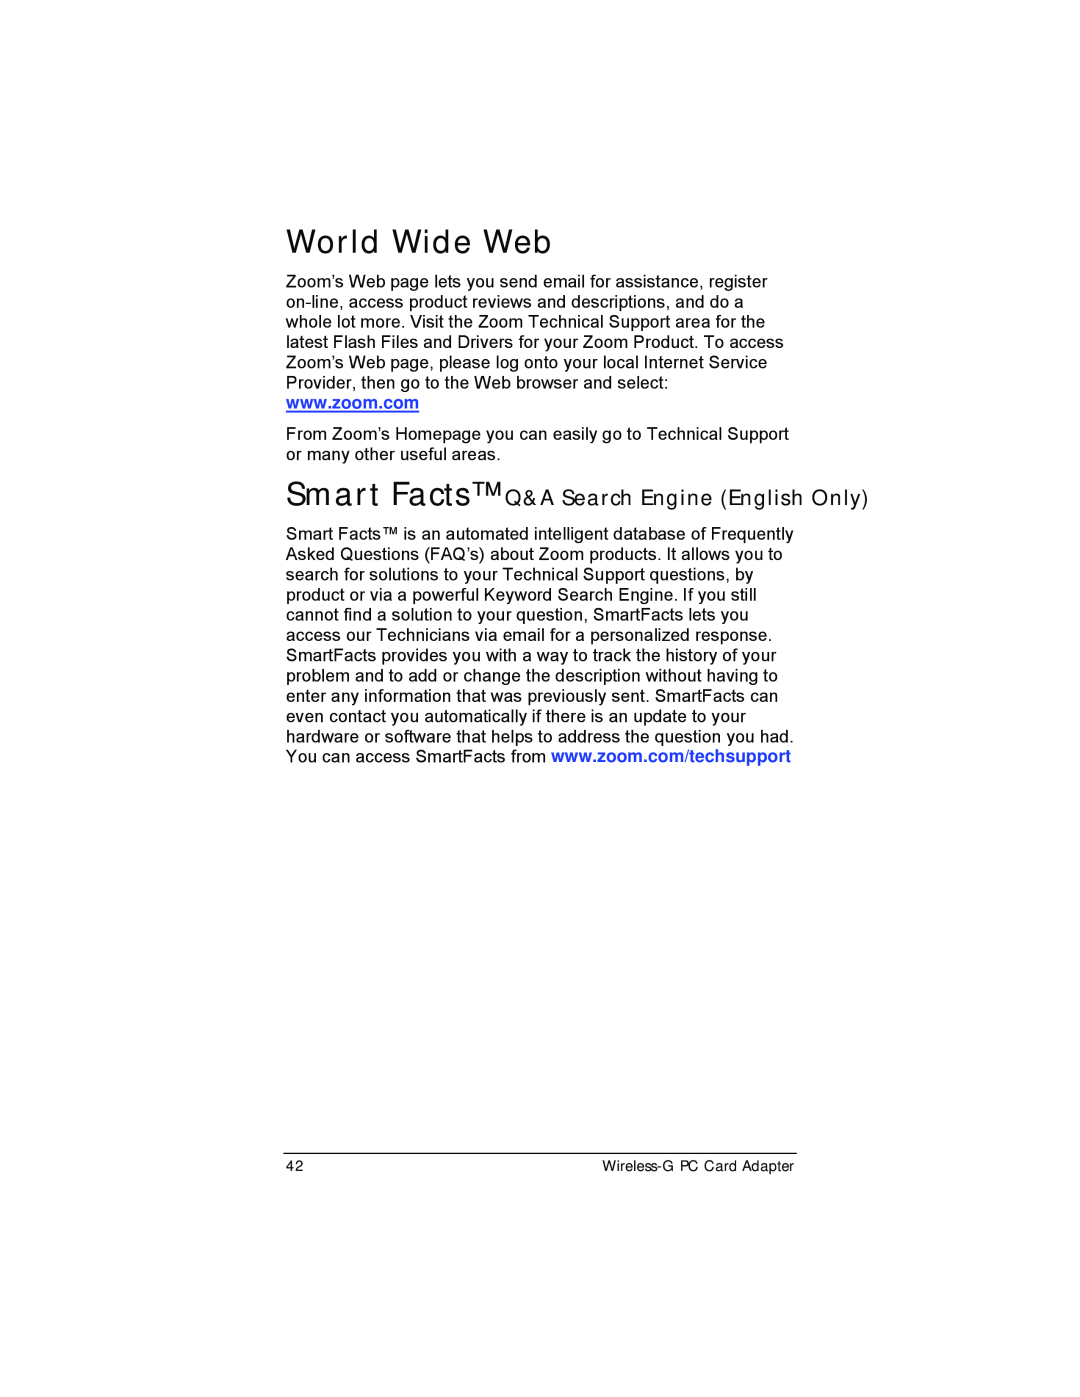 Zoom 4412A/TF manual World Wide Web, Smart Facts Q&A Search Engine English Only 